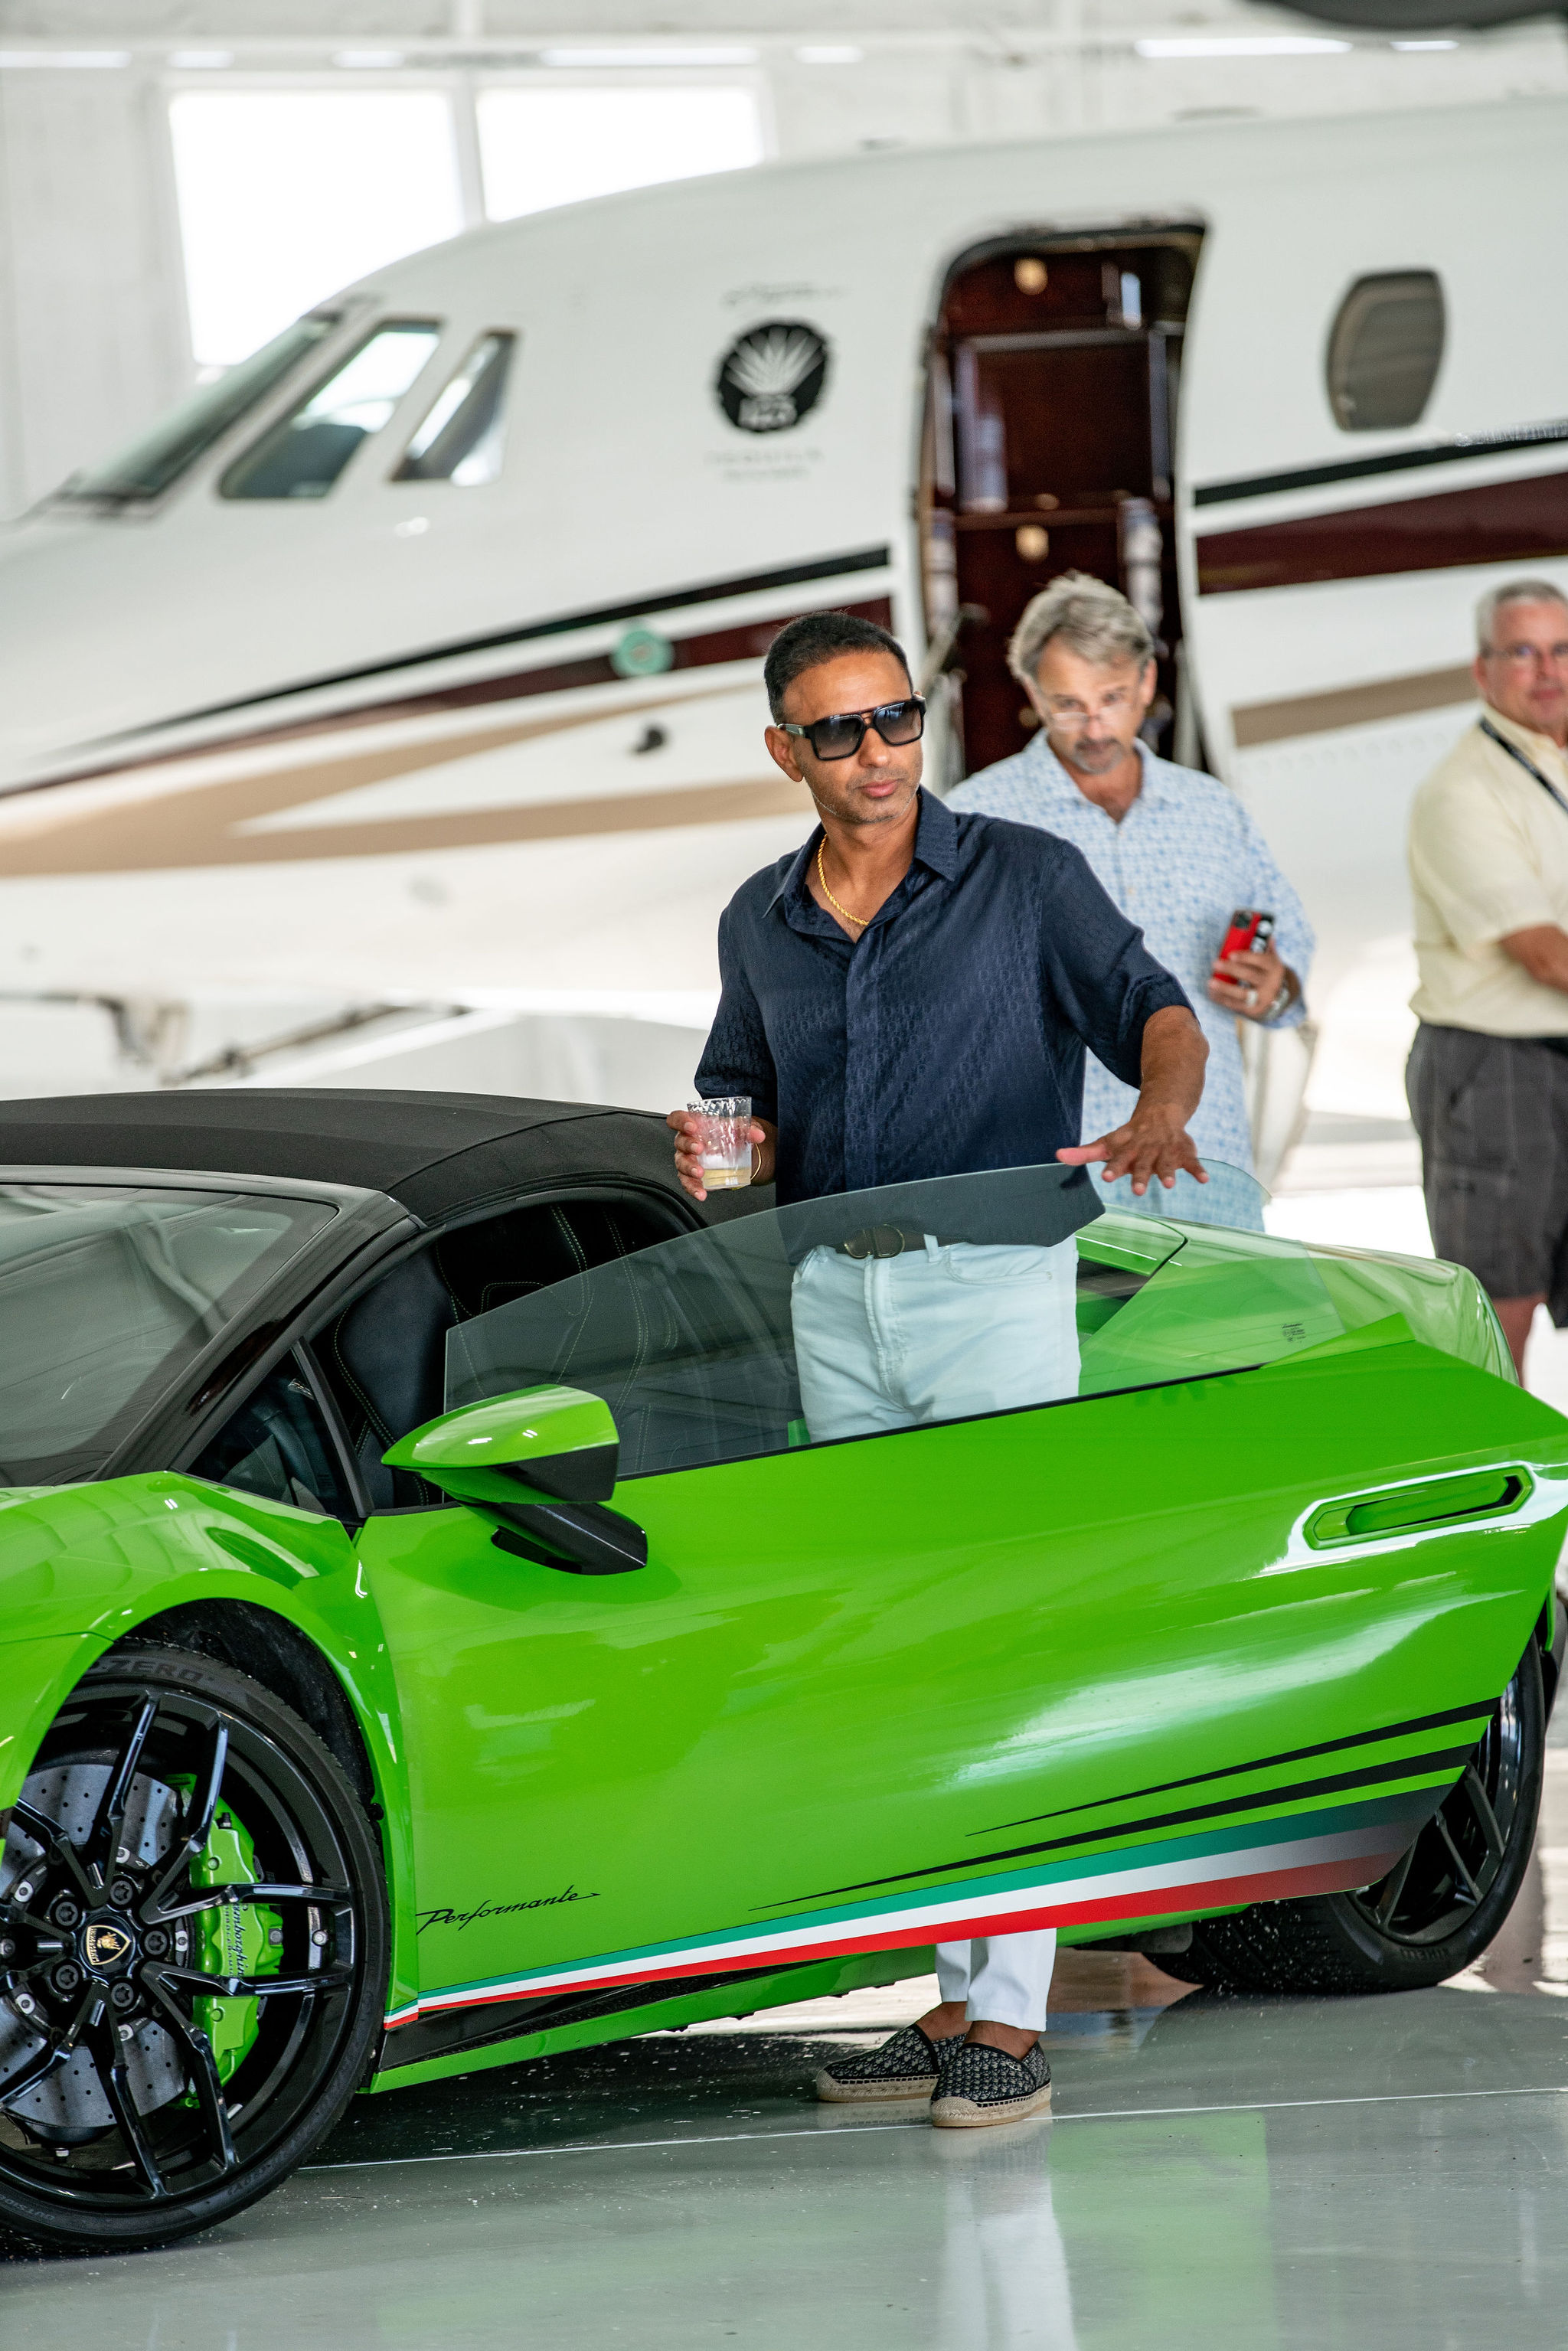 Visitors check out the "Fast Cars and Faster Jets" at the recent event held at RAI Jets.